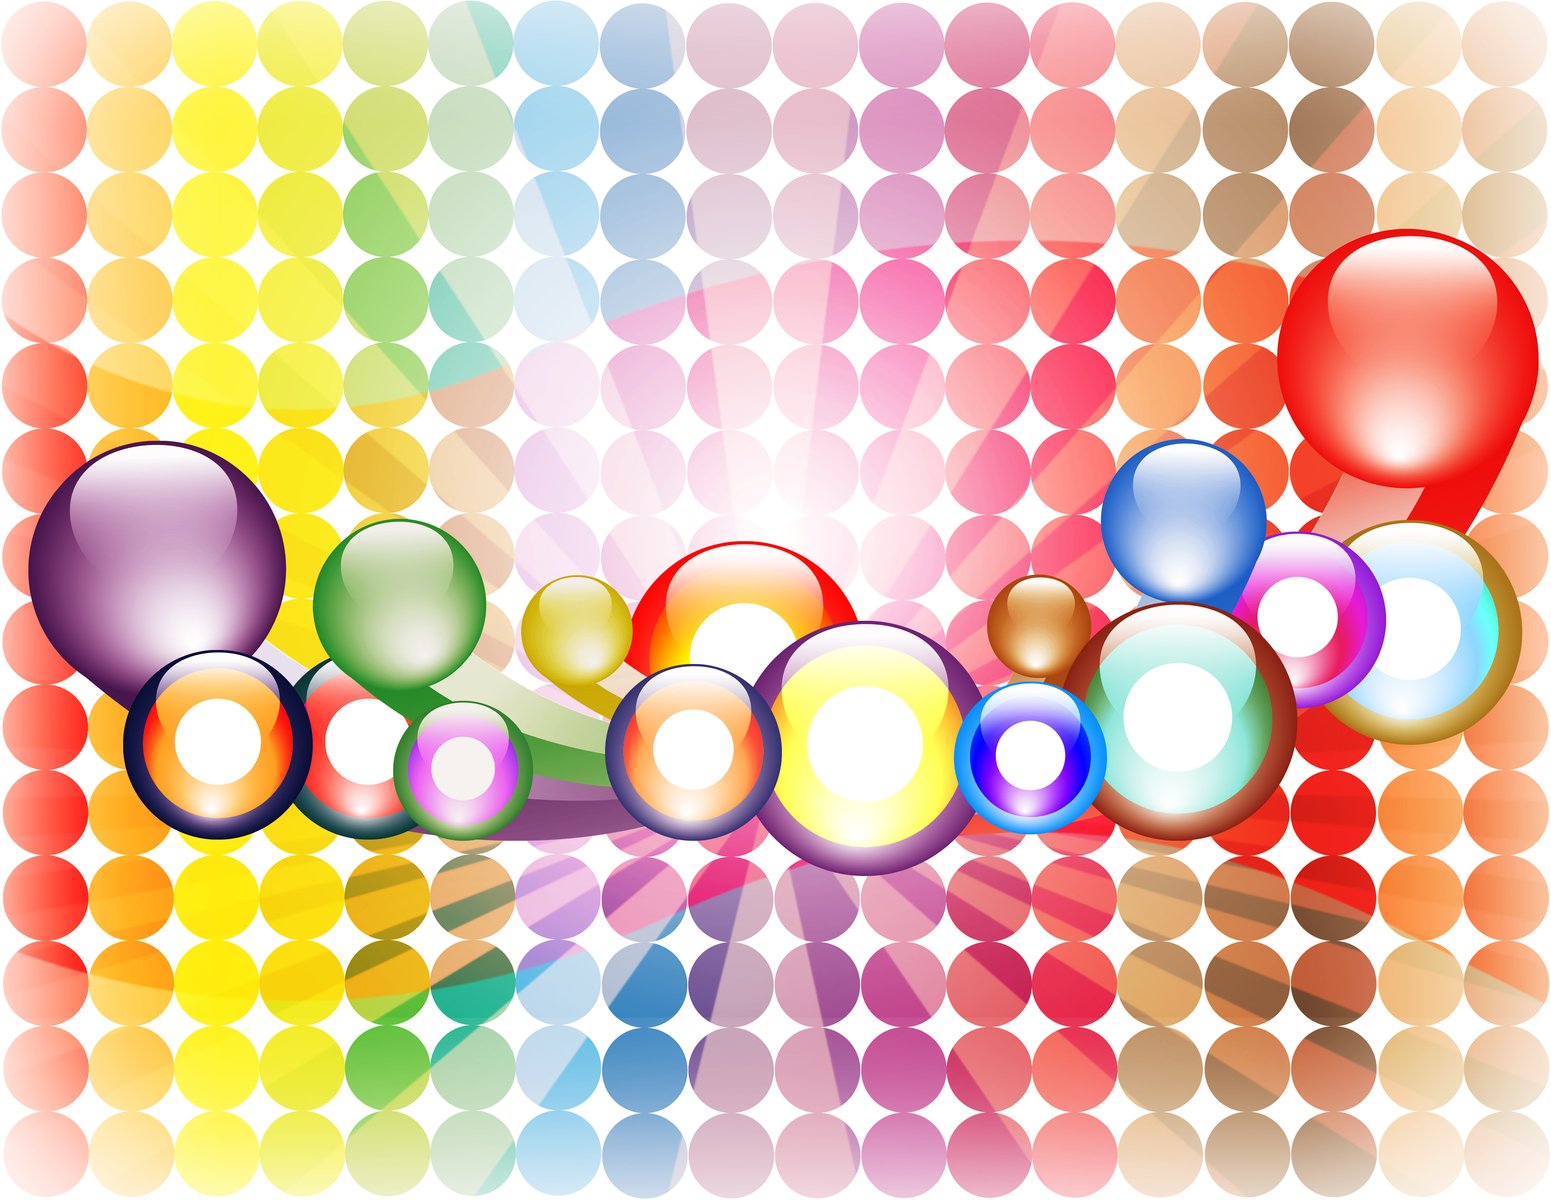 an abstract, colorful illustration of bubbles with different shades of colors